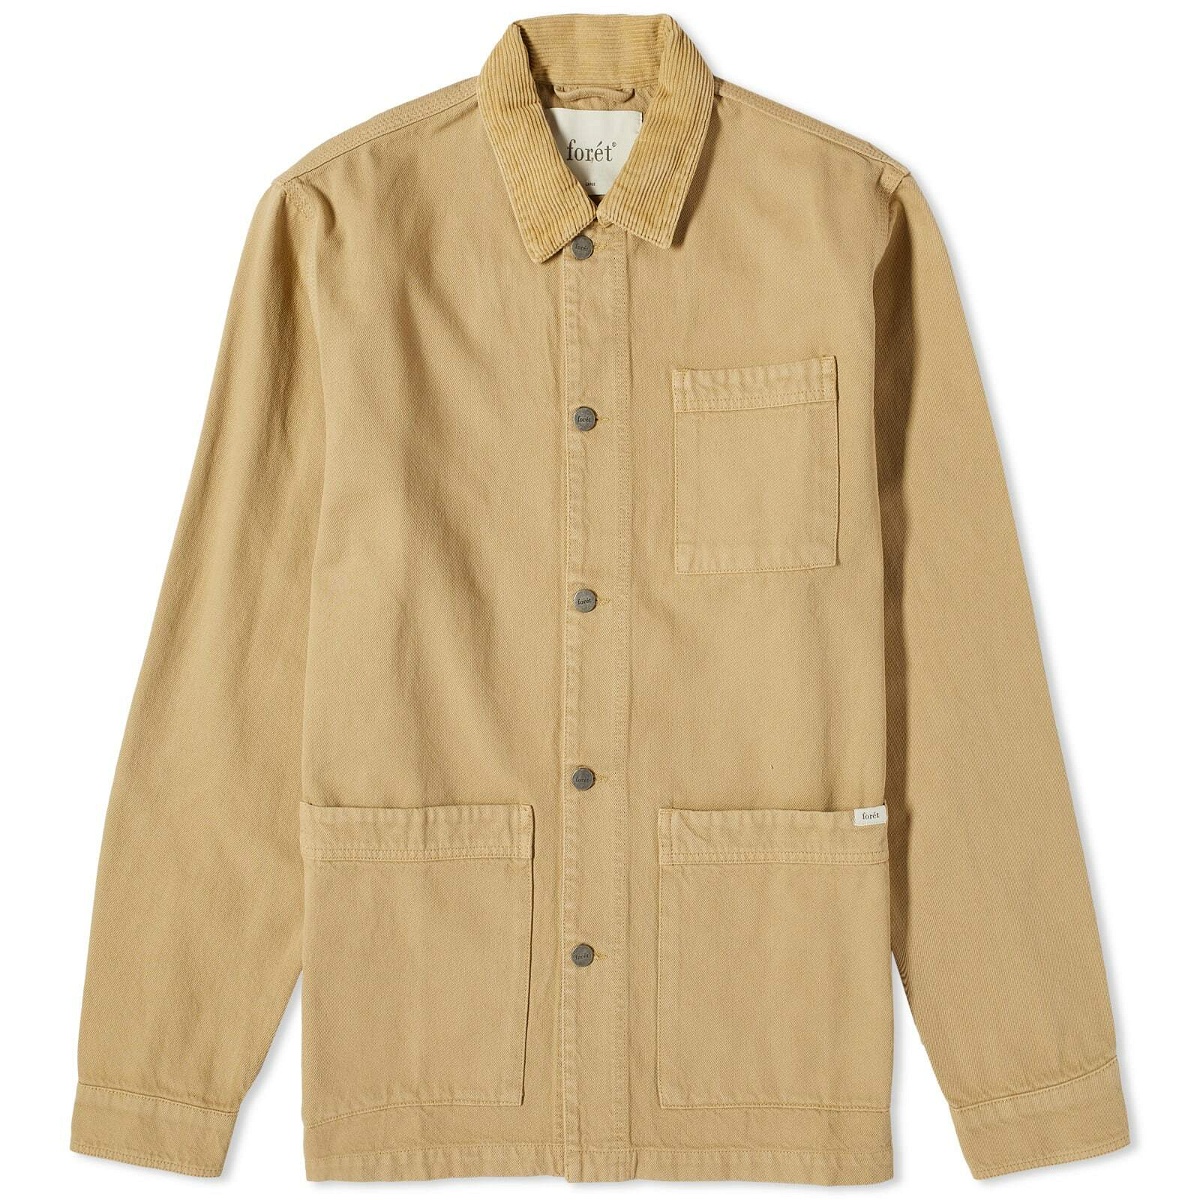 Foret Men's Heyday Chore Jacket in Corn Foret